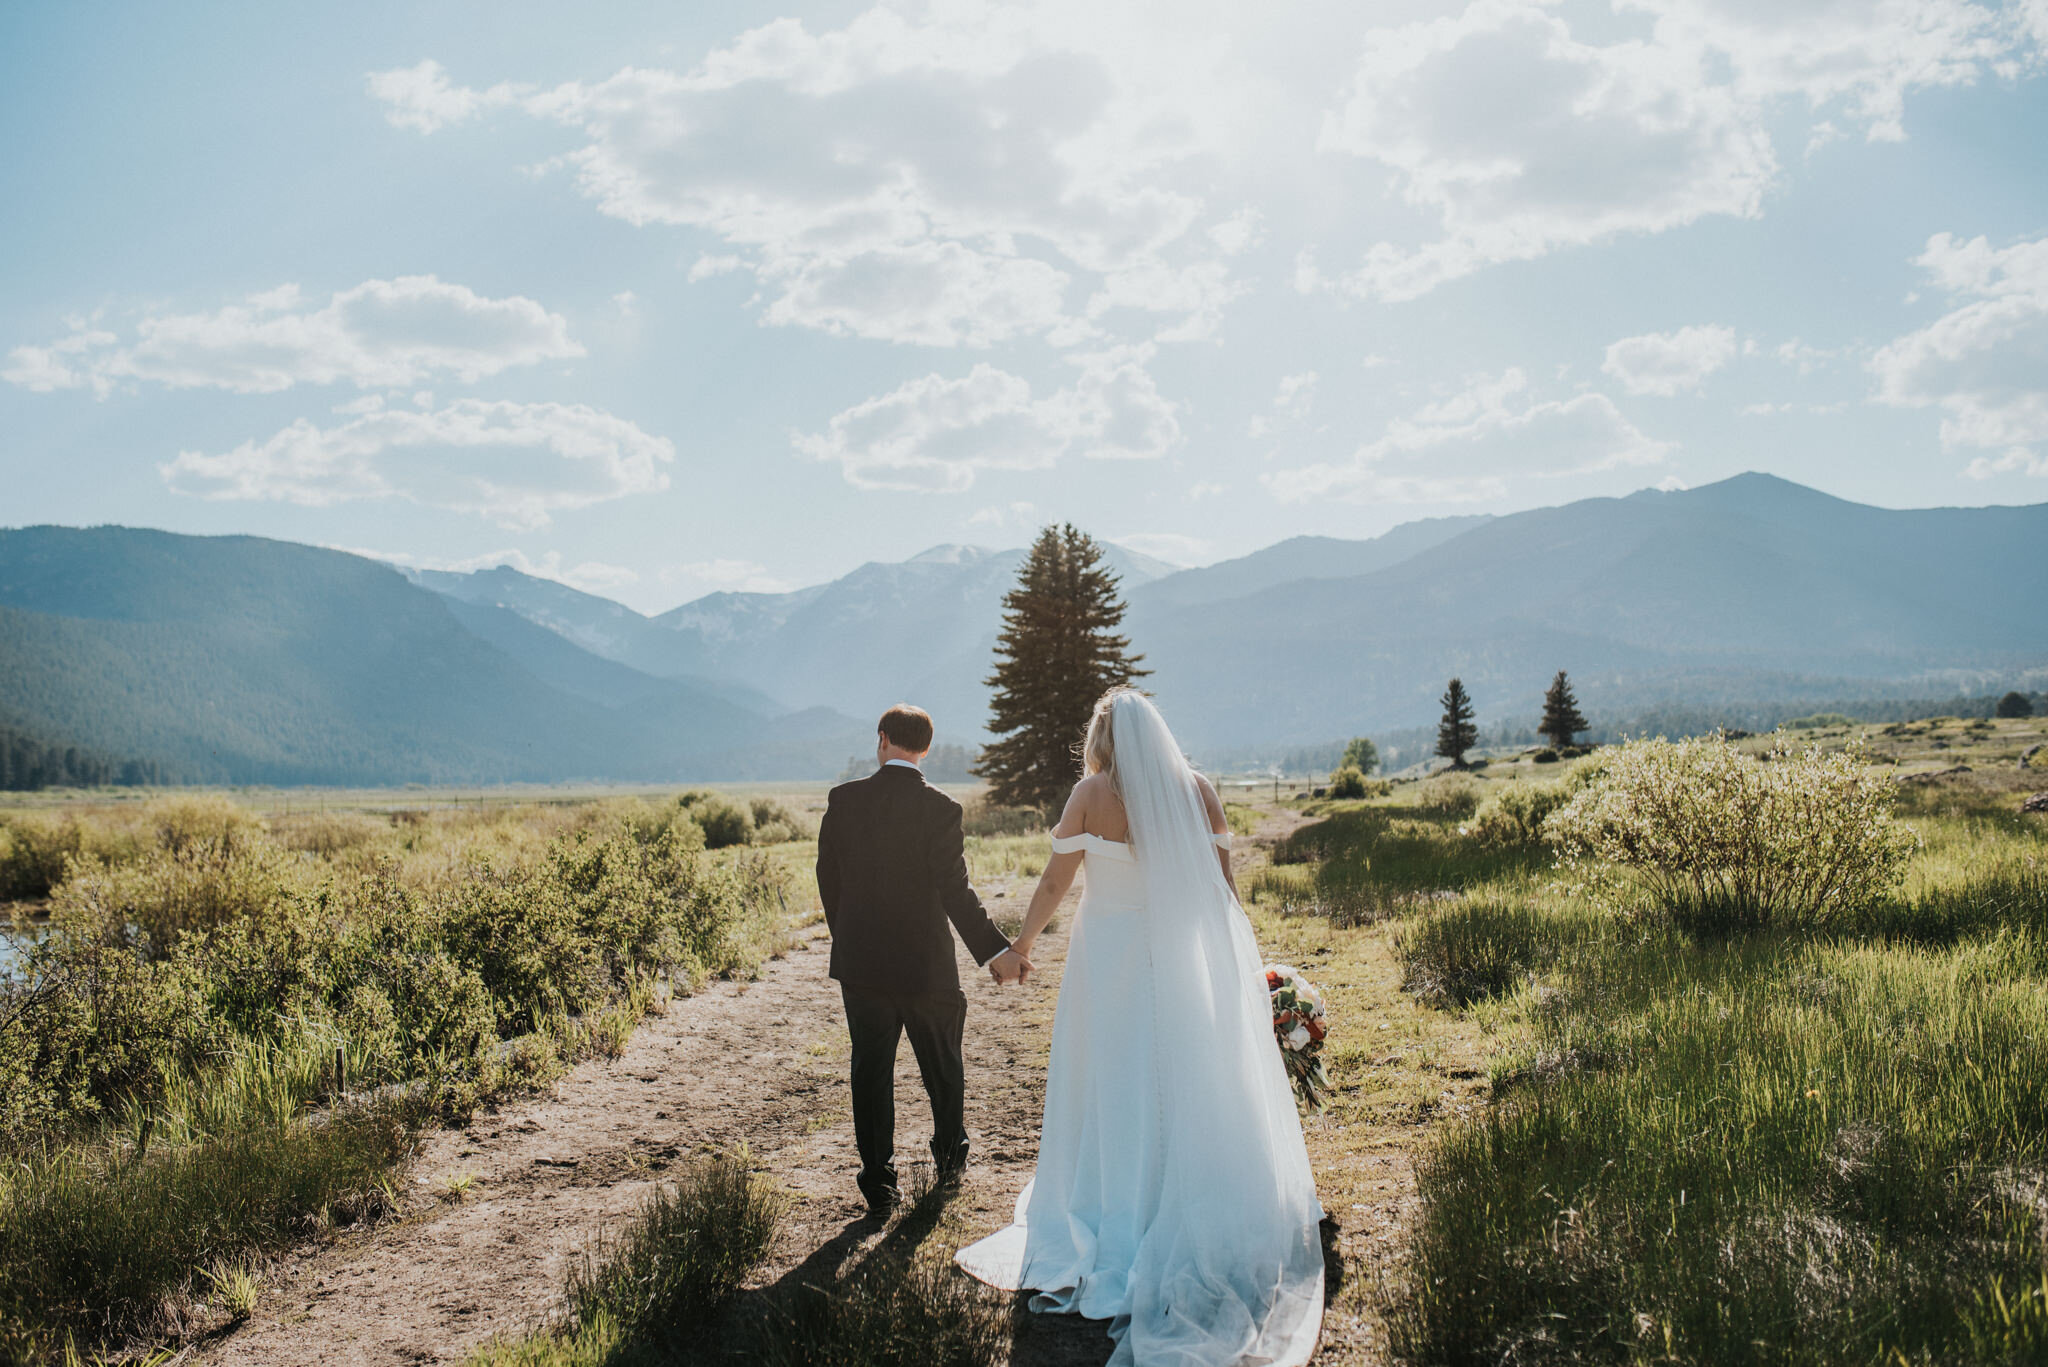 How To Choose The Best Veil For Your Dress - Rocky Mountain Bride